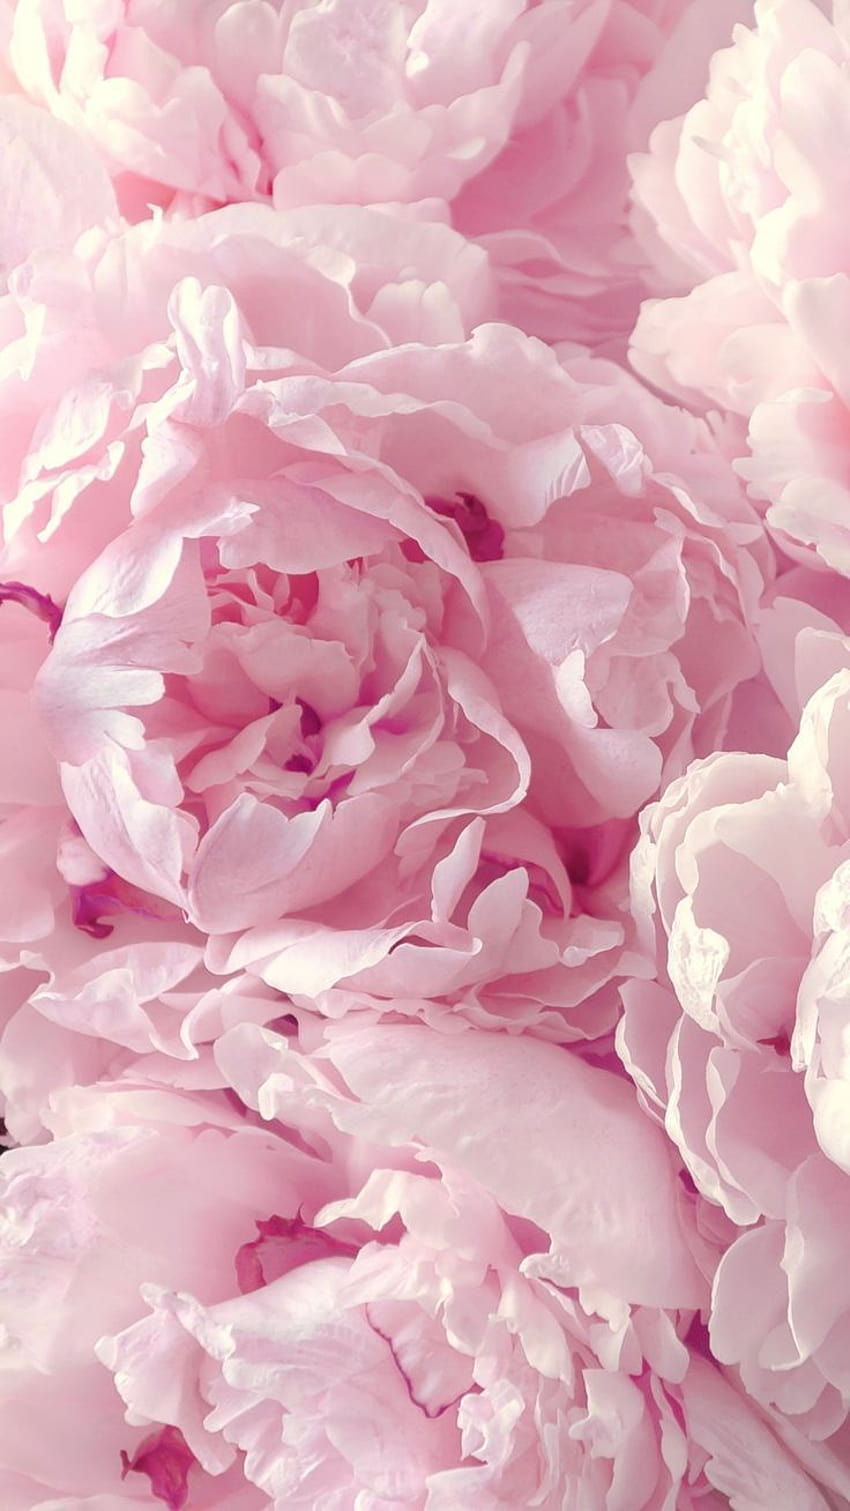 Peonies for your iPhone 6 Plus from Everpix app, pink peonies HD phone wallpaper